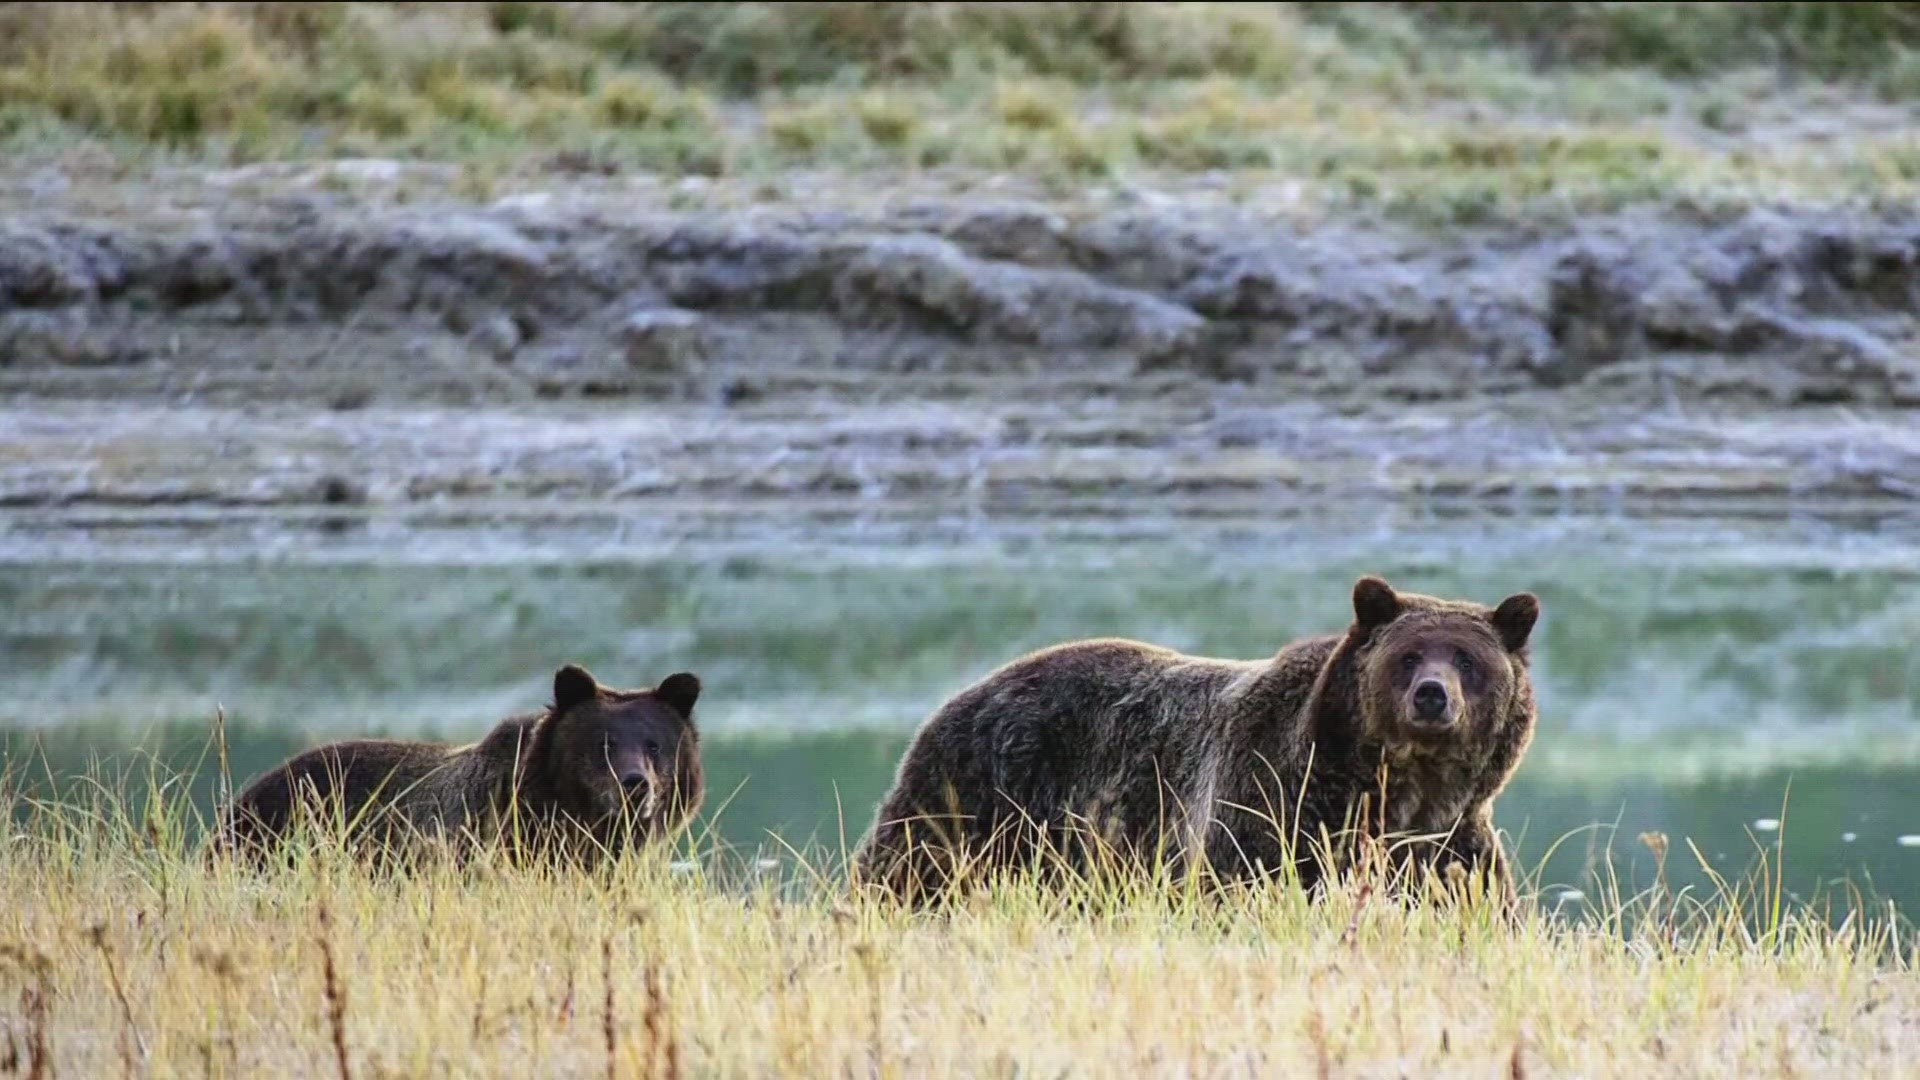 Idaho Fish and Game said the bears were captured after months of conflicts and interactions with humans.